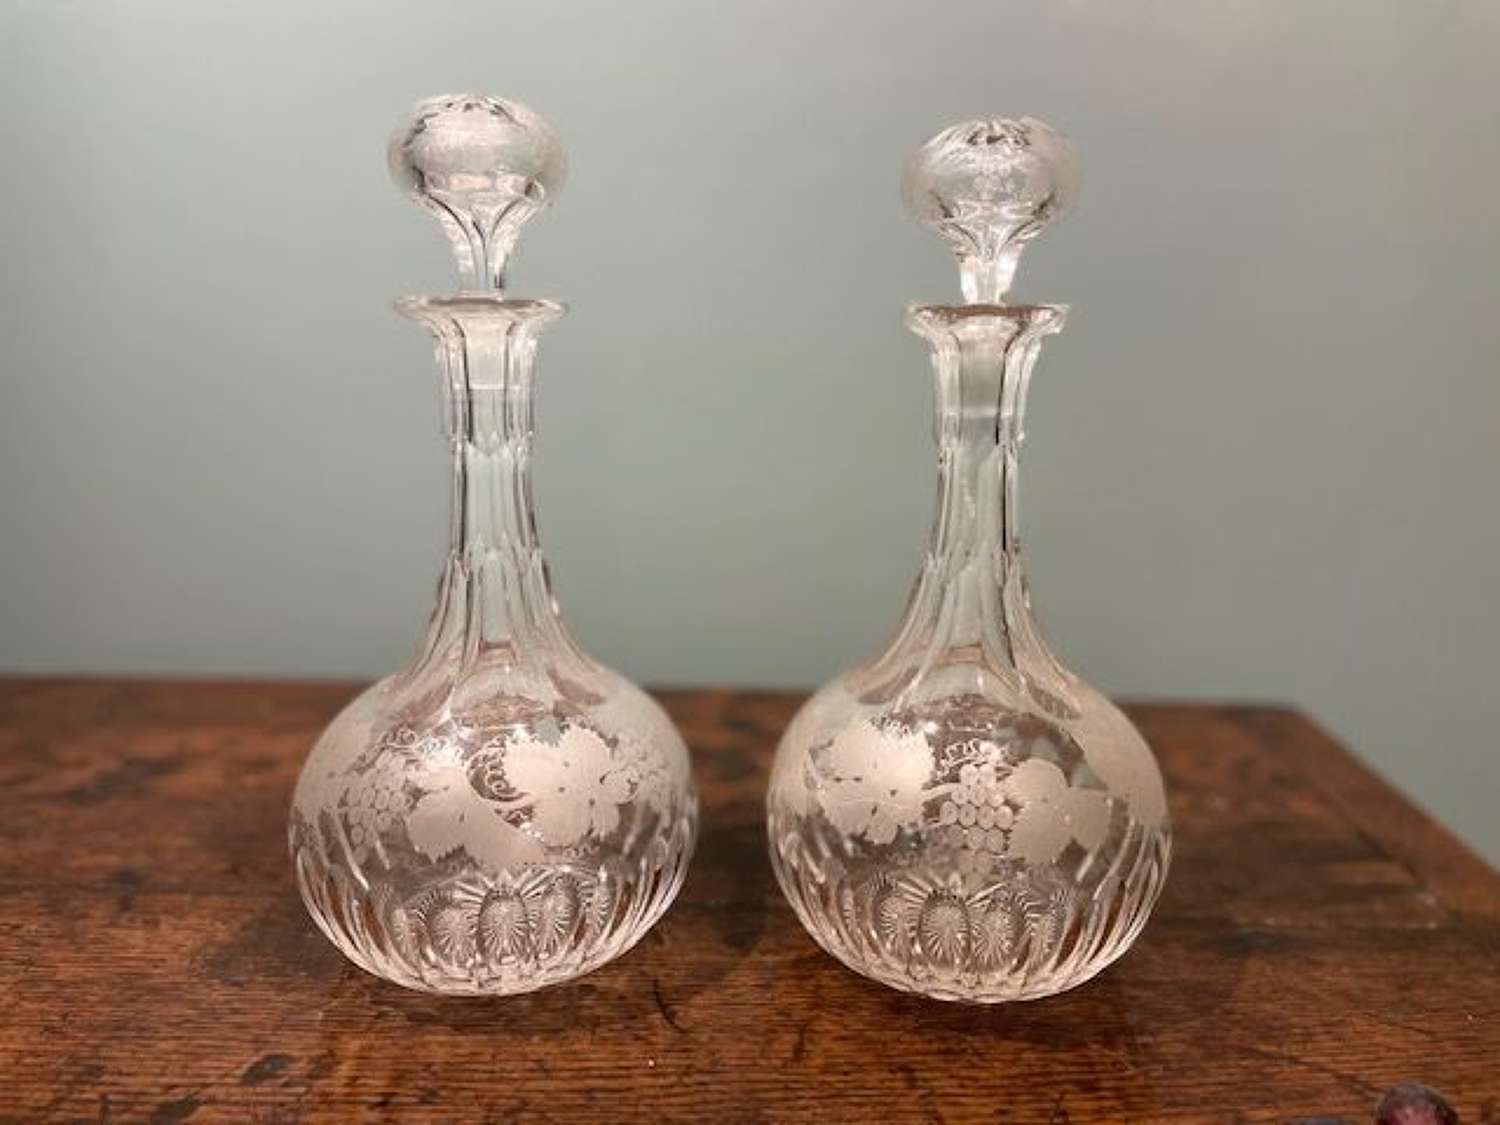 Pair of mid 19th c. Shaft & Globe decanters with grapevine motifs